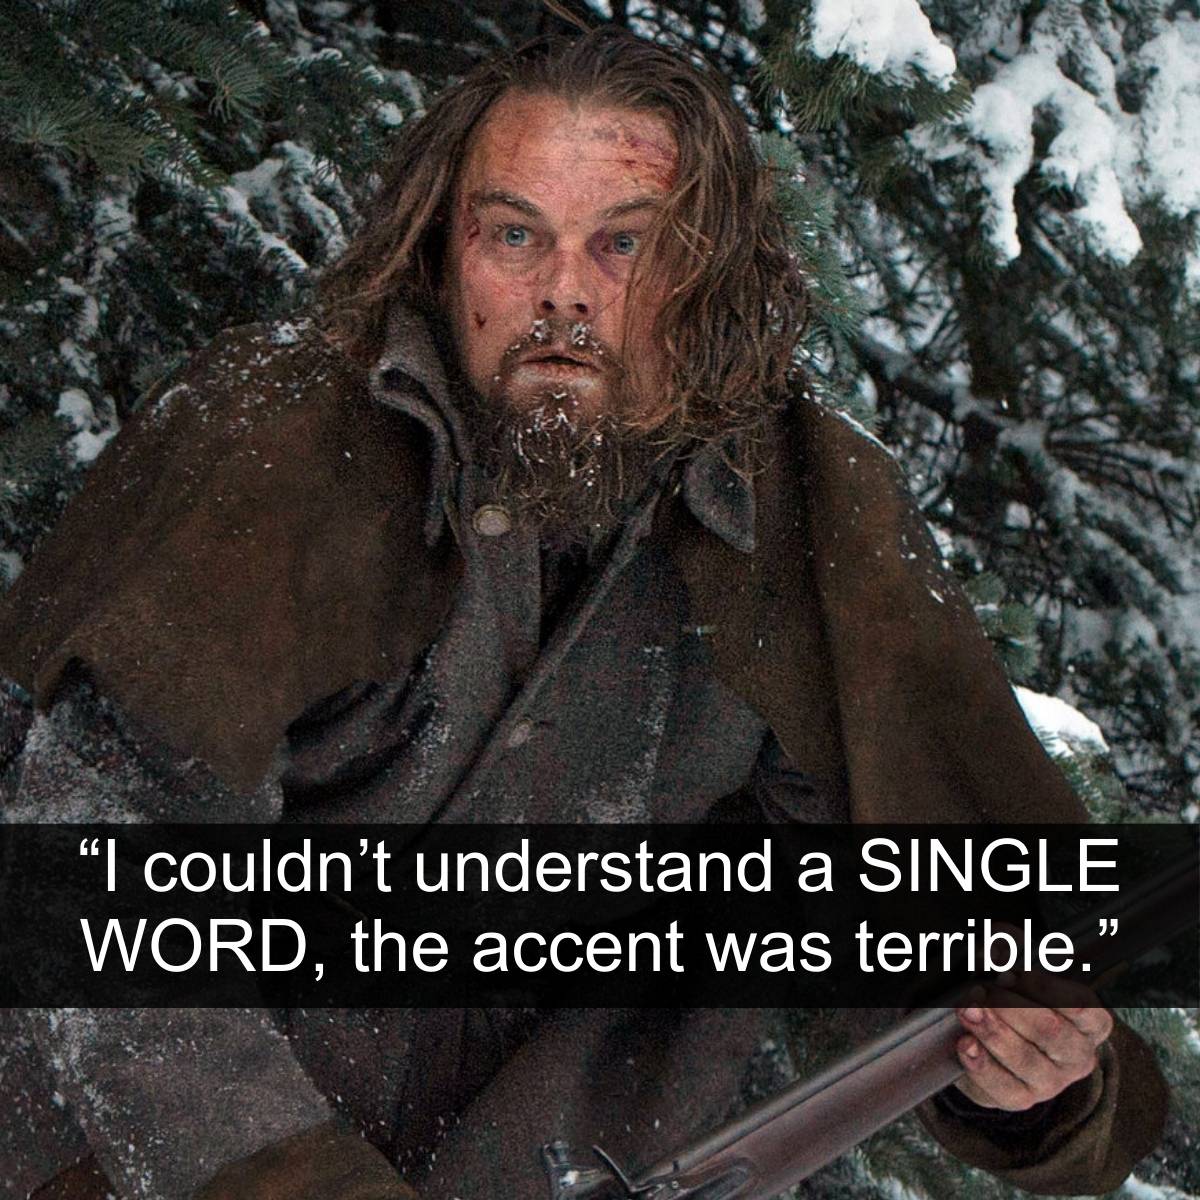 <p>This person's take on The Revenant is pretty straightforward but definitely stirs the pot: understanding what the characters were saying felt impossible because of the thick accents. It's like, no matter how hard you tried, getting the gist of the conversations was a real struggle. This point digs into how the movie was shooting for realism with its accents and historical setting, but maybe it went a bit overboard.</p> <p>It ended up making it tough for some viewers to catch what was going on, which can be a bummer when you're trying to get lost in the story. It's a reminder that while going all-in on the authenticity vibe is cool and all, there's got to be a balance so everyone can still follow along with the plot and get the full experience.</p>